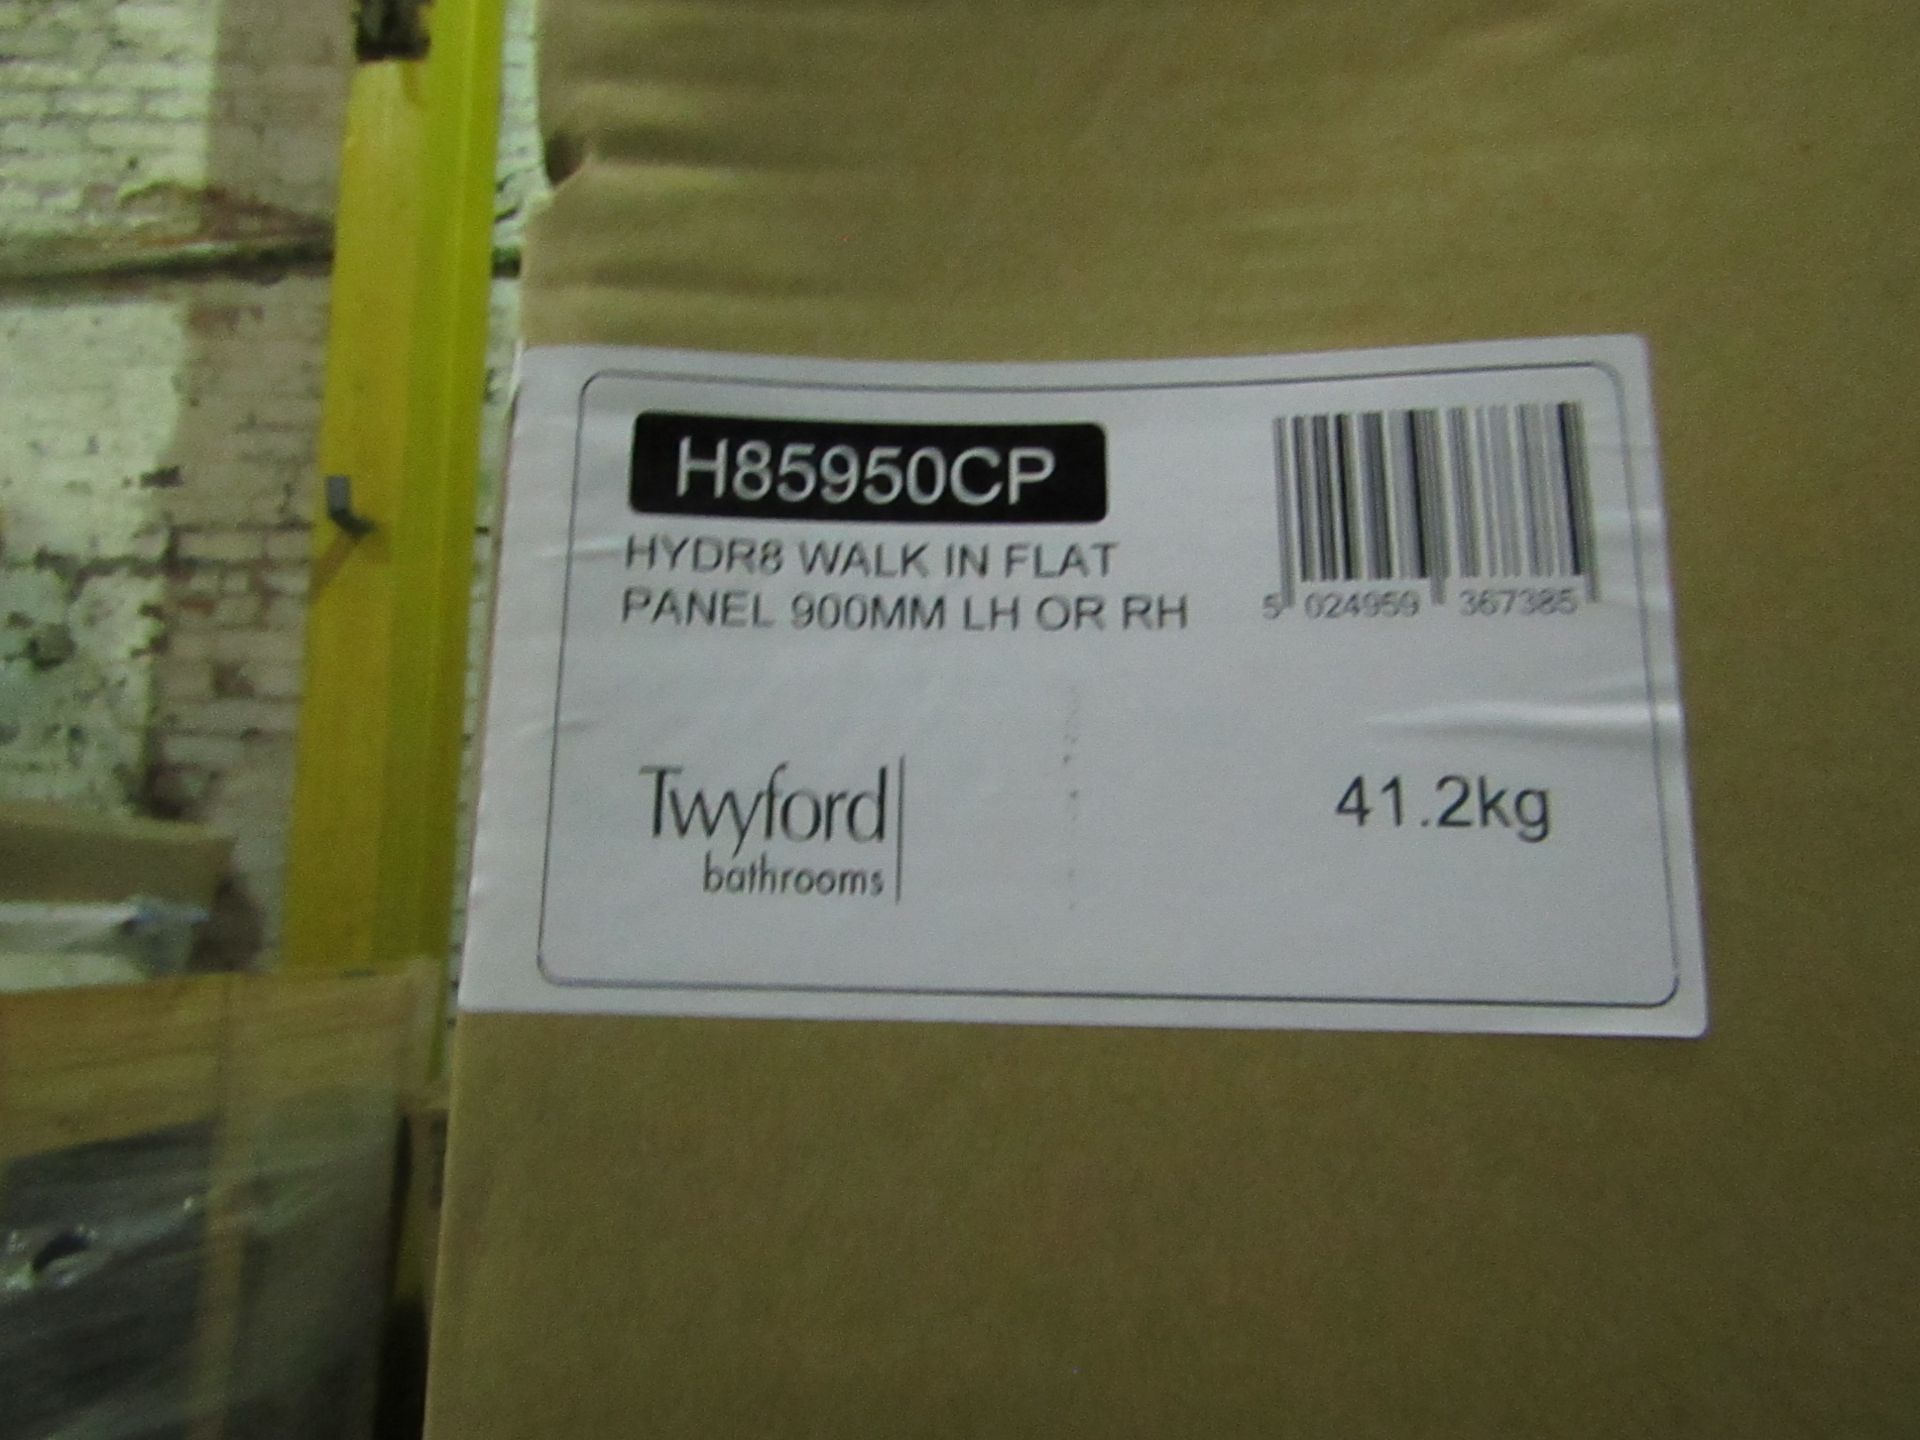 Twyfords - Hydr8 walk in flat 900mm glass panel for left or right hand - New & Boxed.